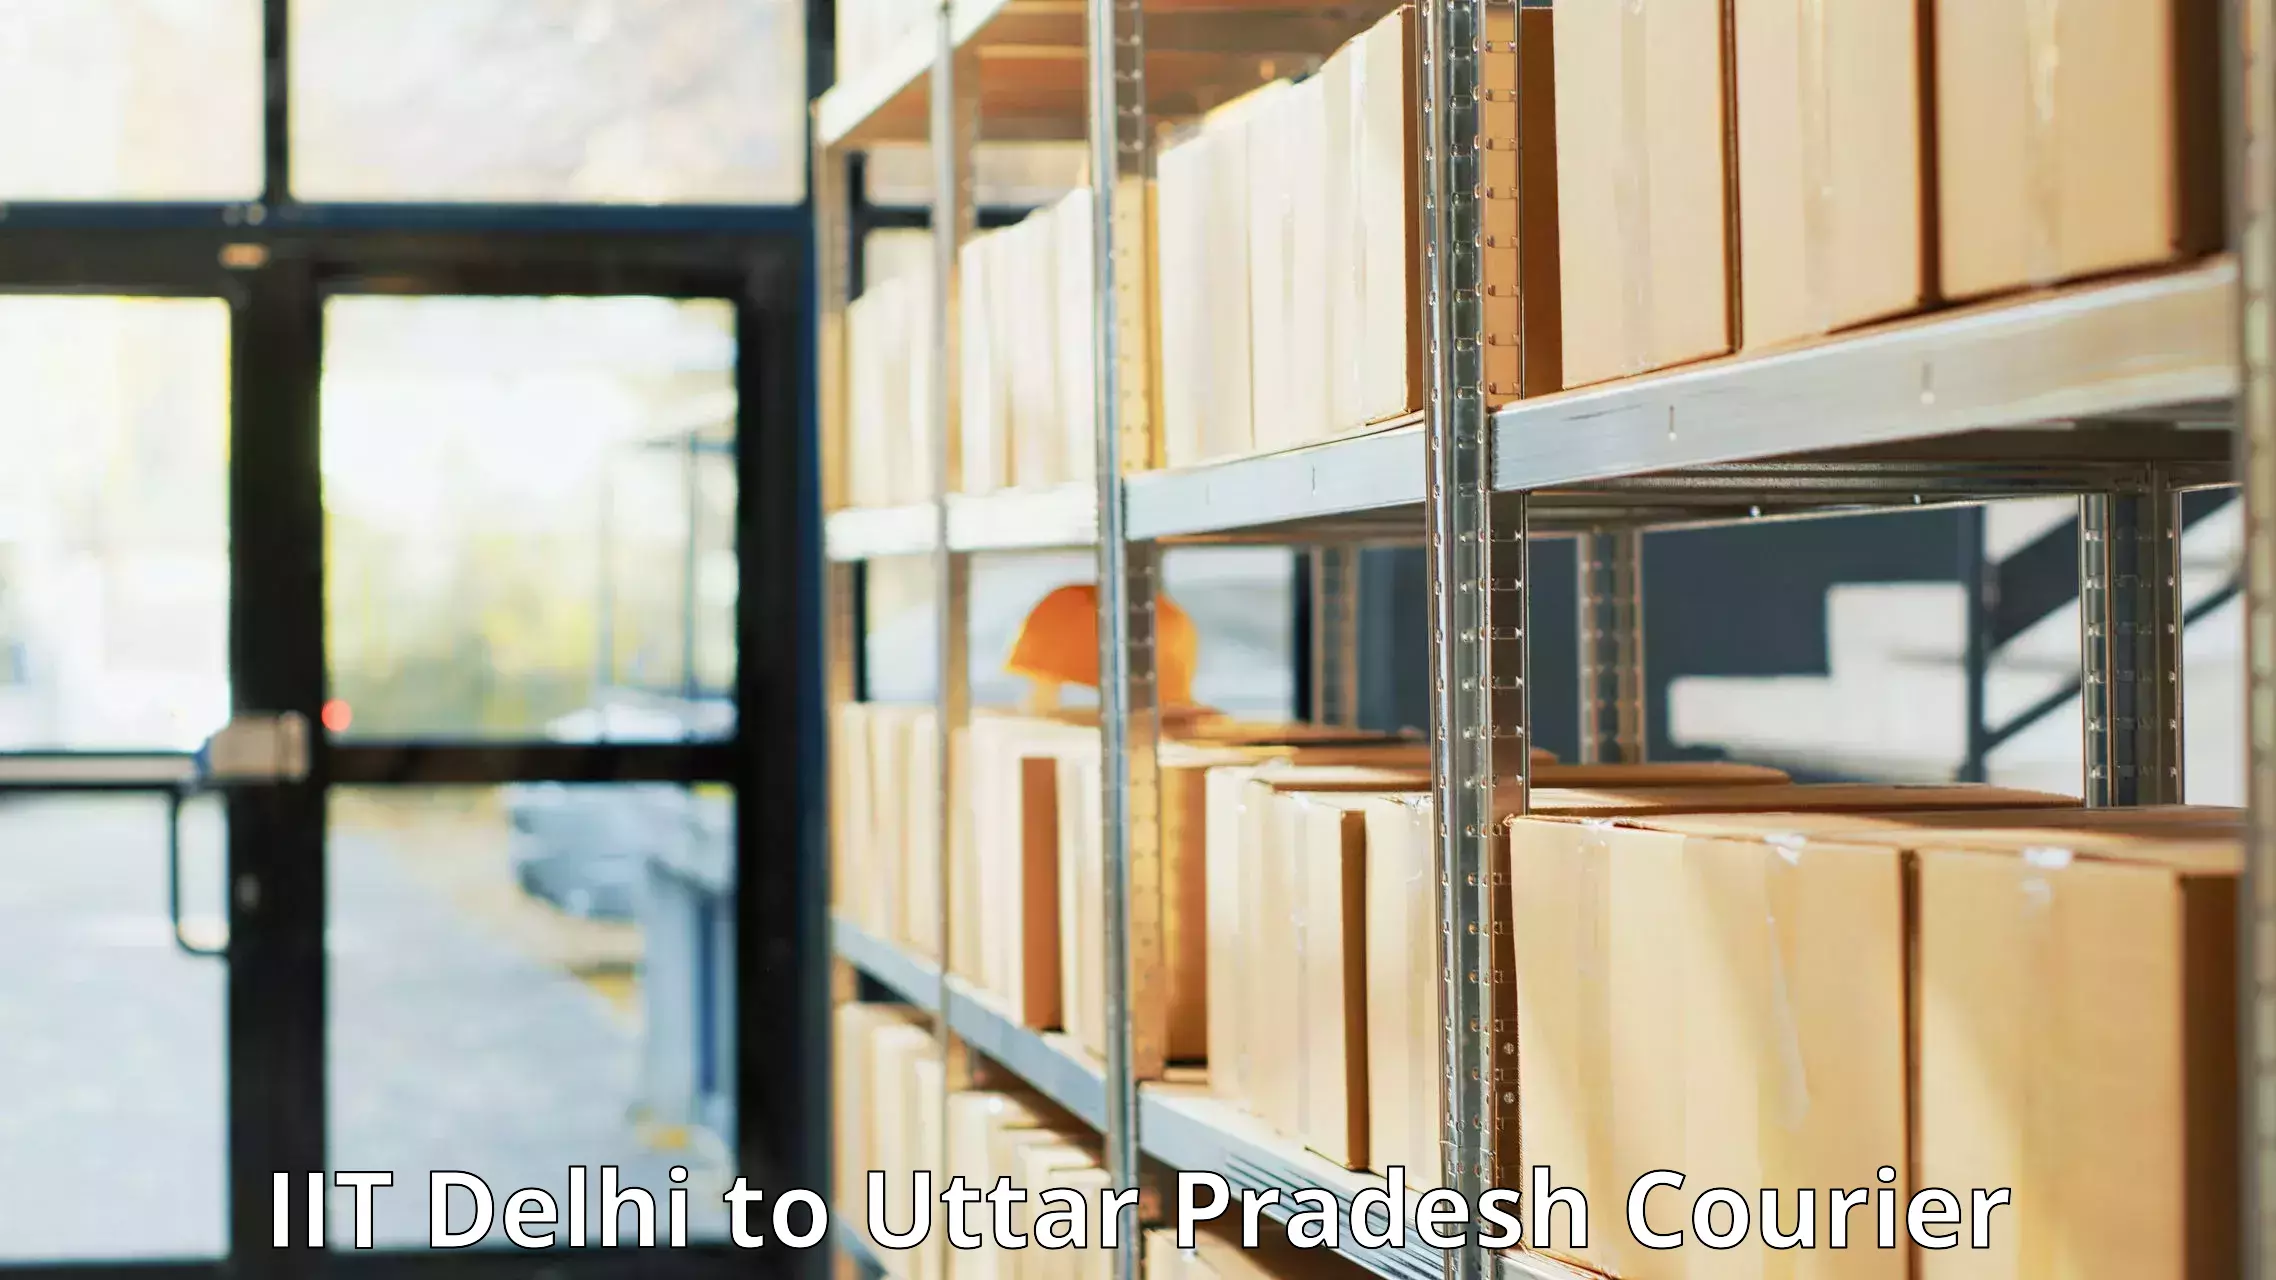 Courier insurance IIT Delhi to IIT Kanpur